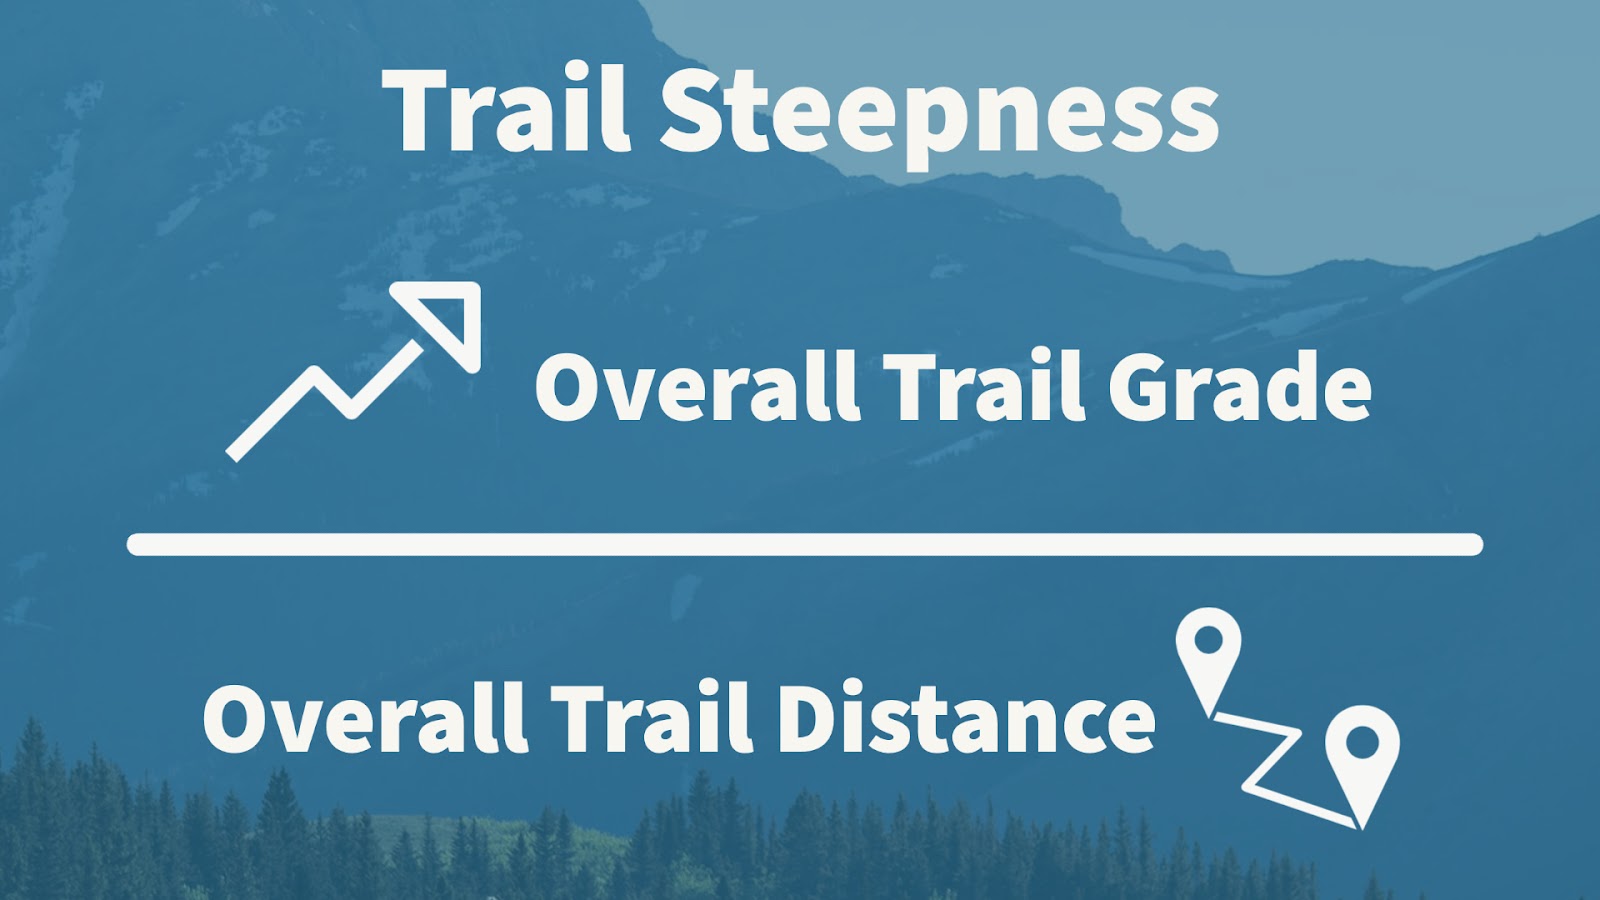 Determining trail steepness for trail running. Overall trail grade/overall trail distance.